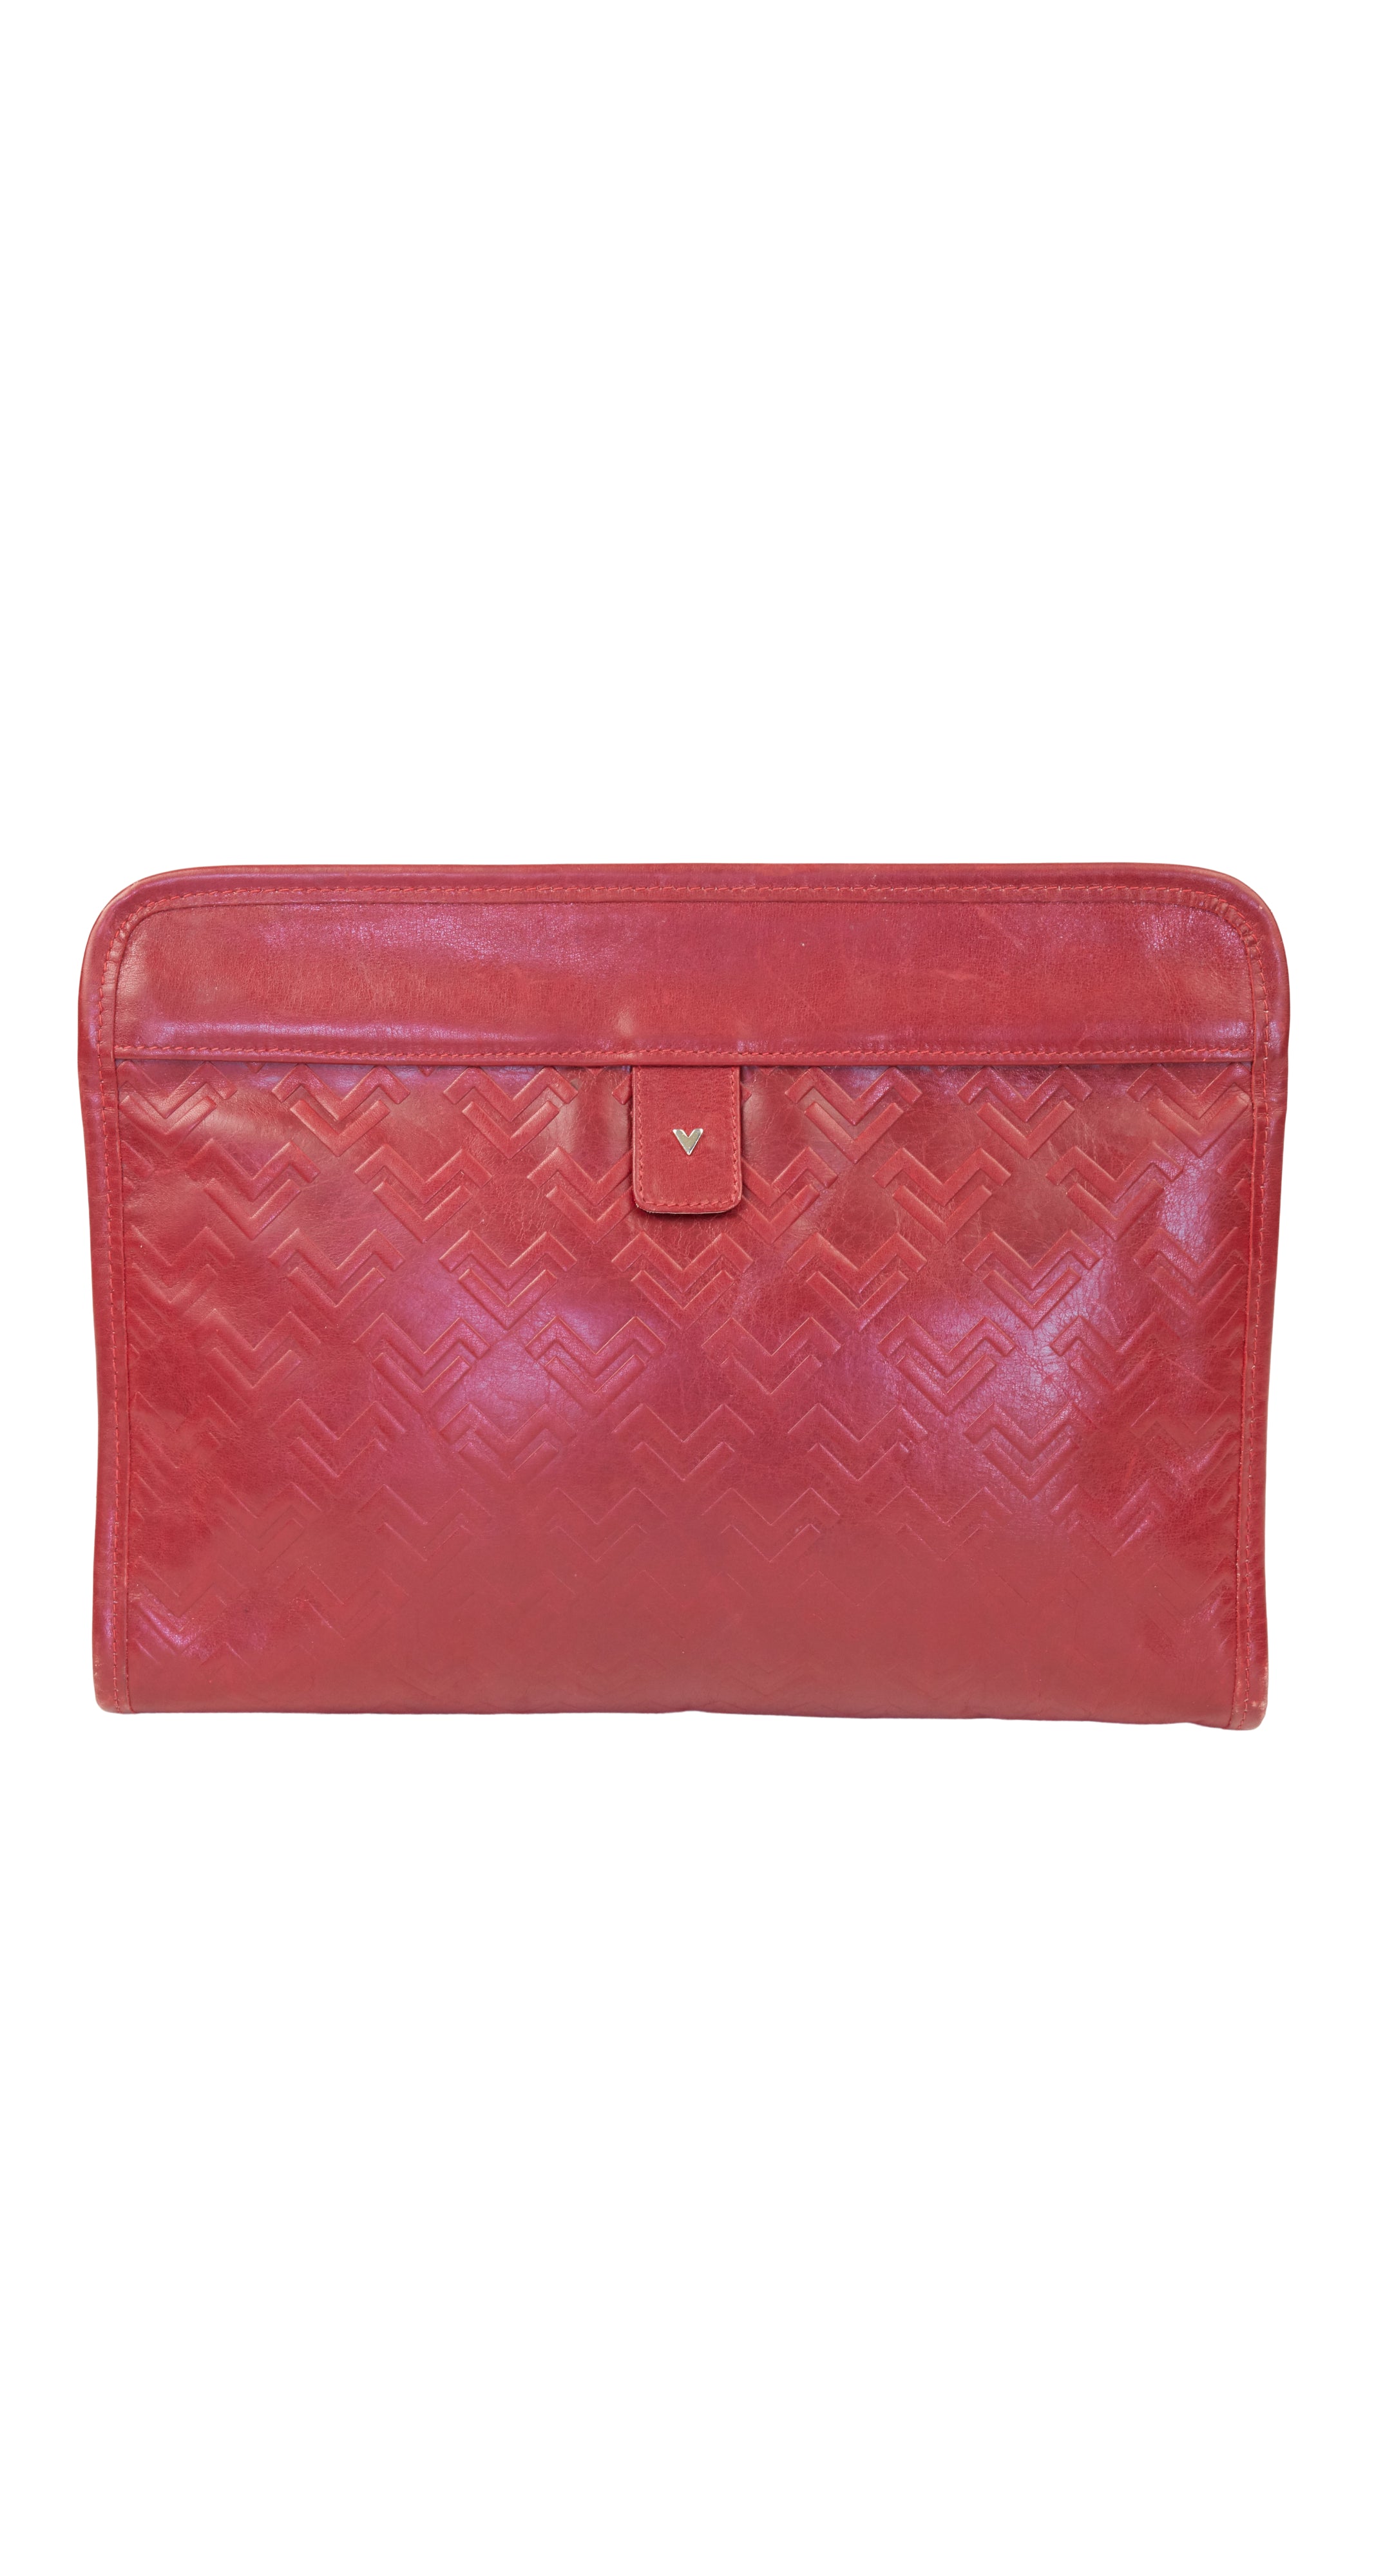 1970s Monogram Red Leather Clutch Bag